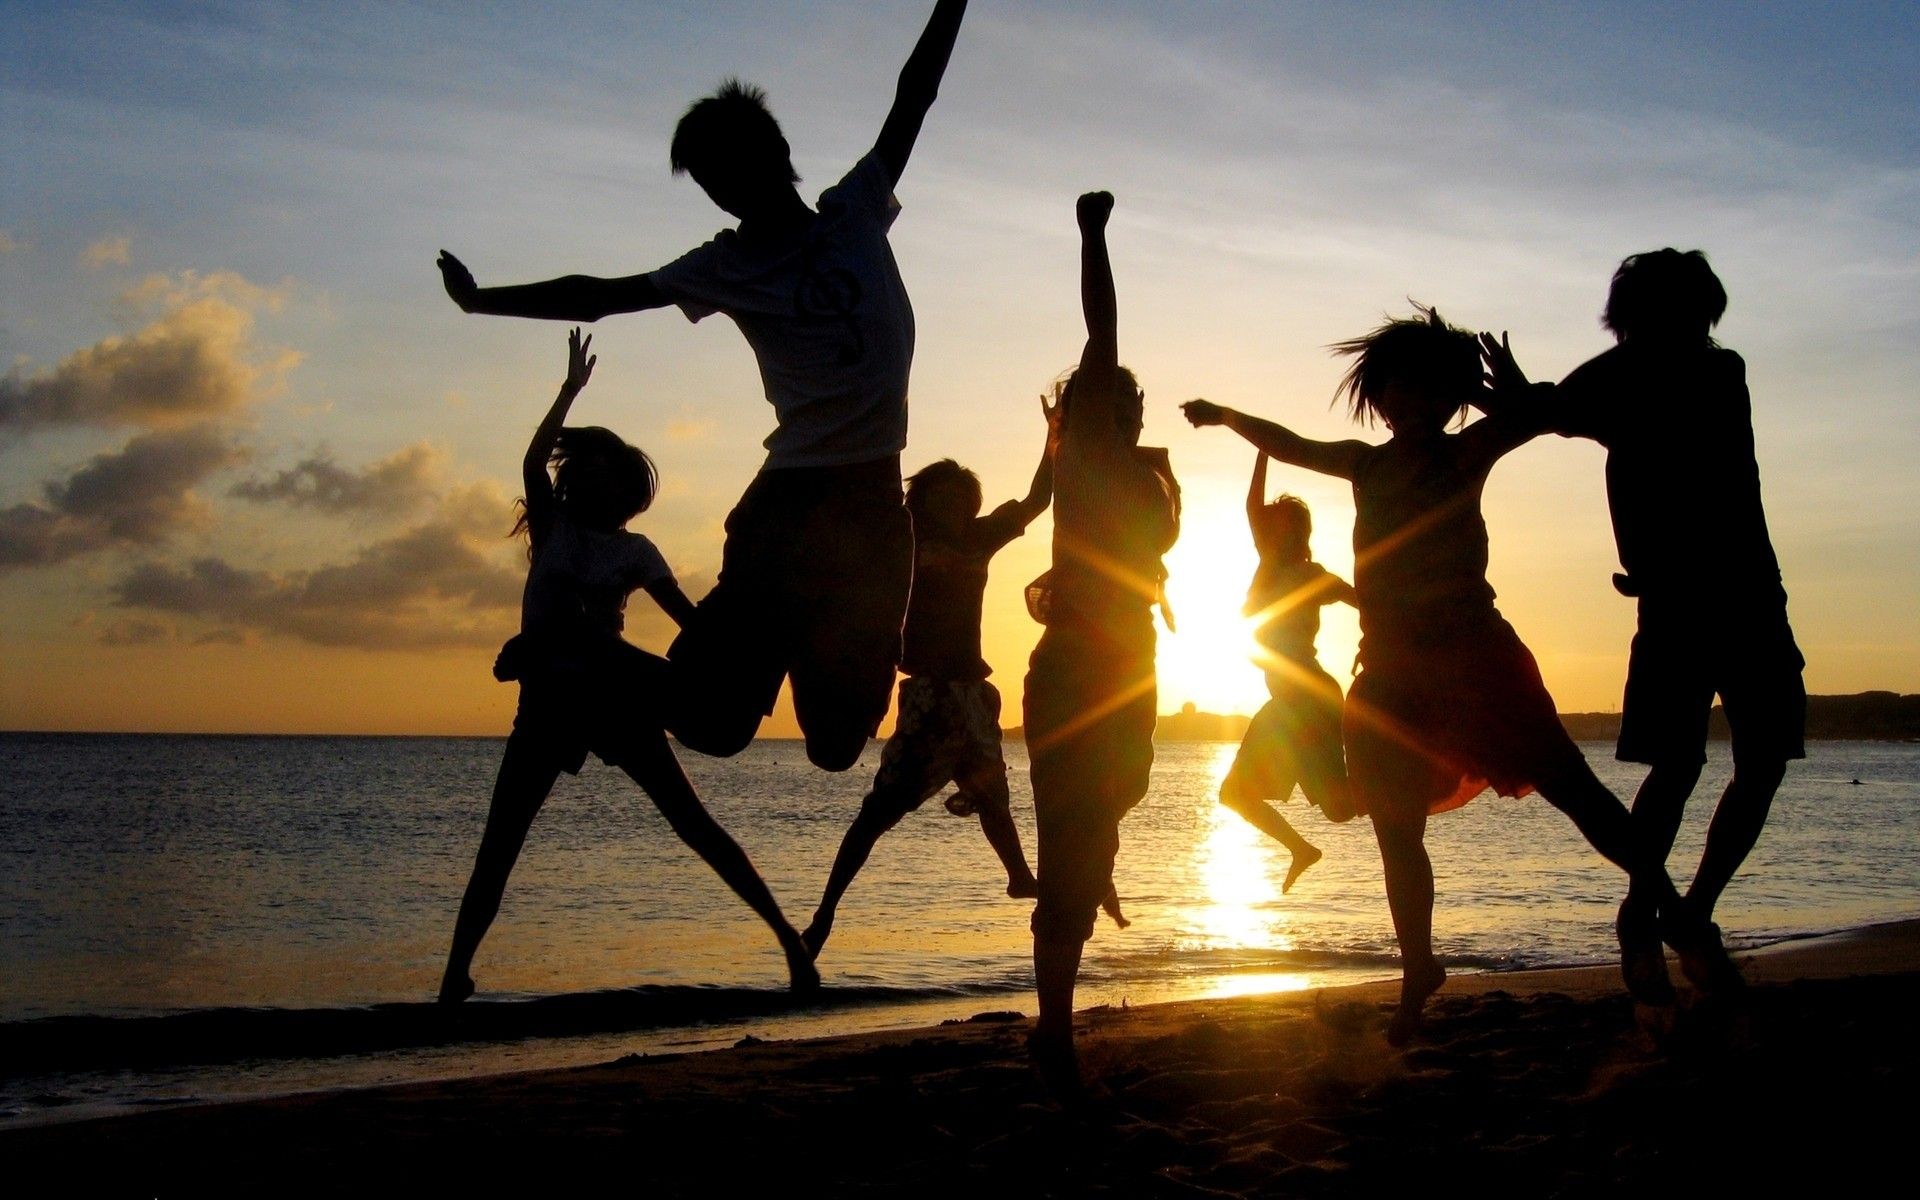 Happy people, friends, happiness, sunset, beach wallpaper download. Wallpaper, picture, photo